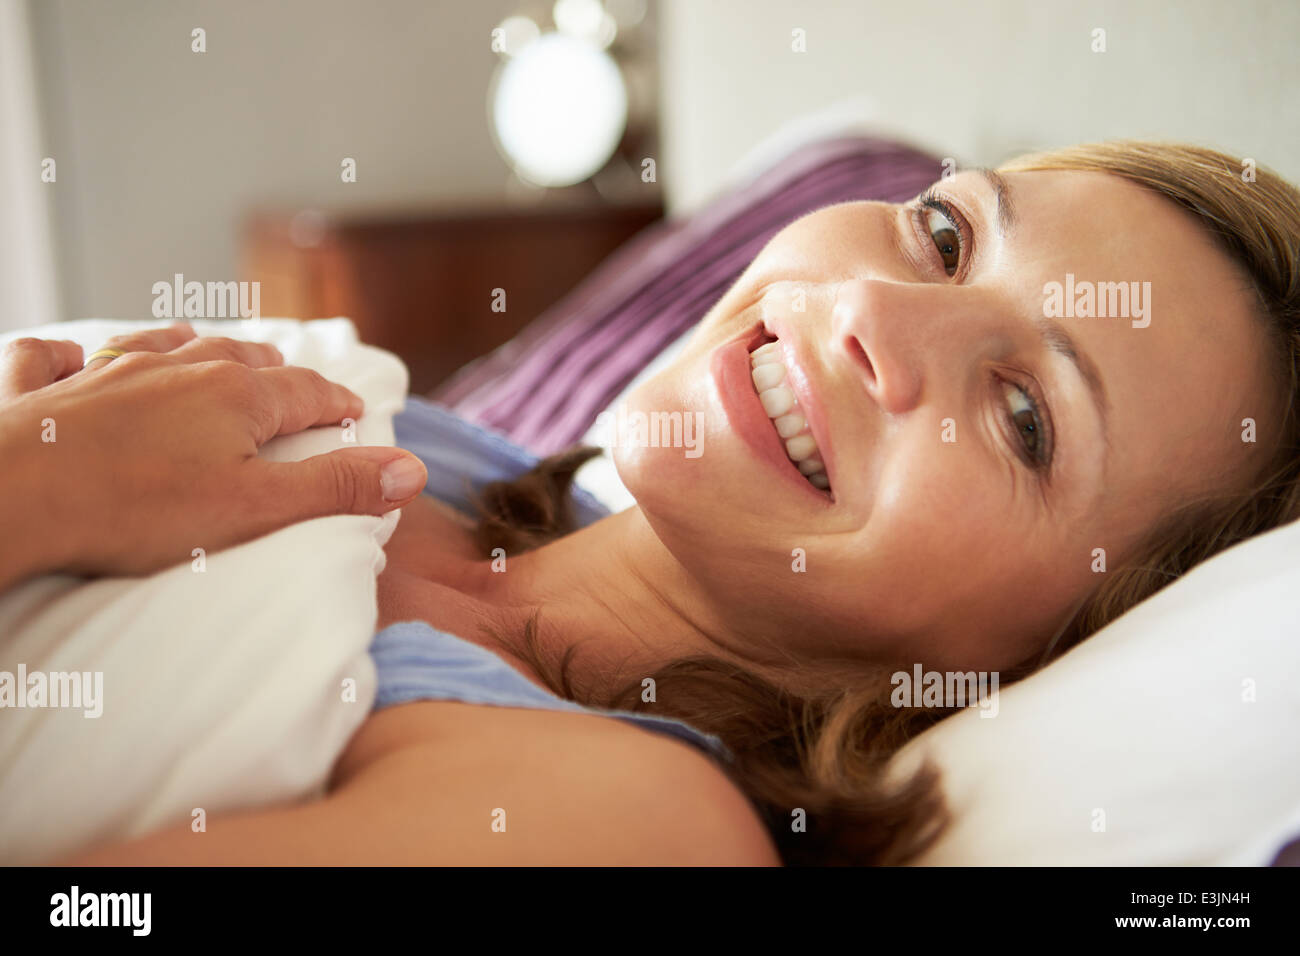 Attractive Middle Aged Woman Waking Up In Bed Stock Photo